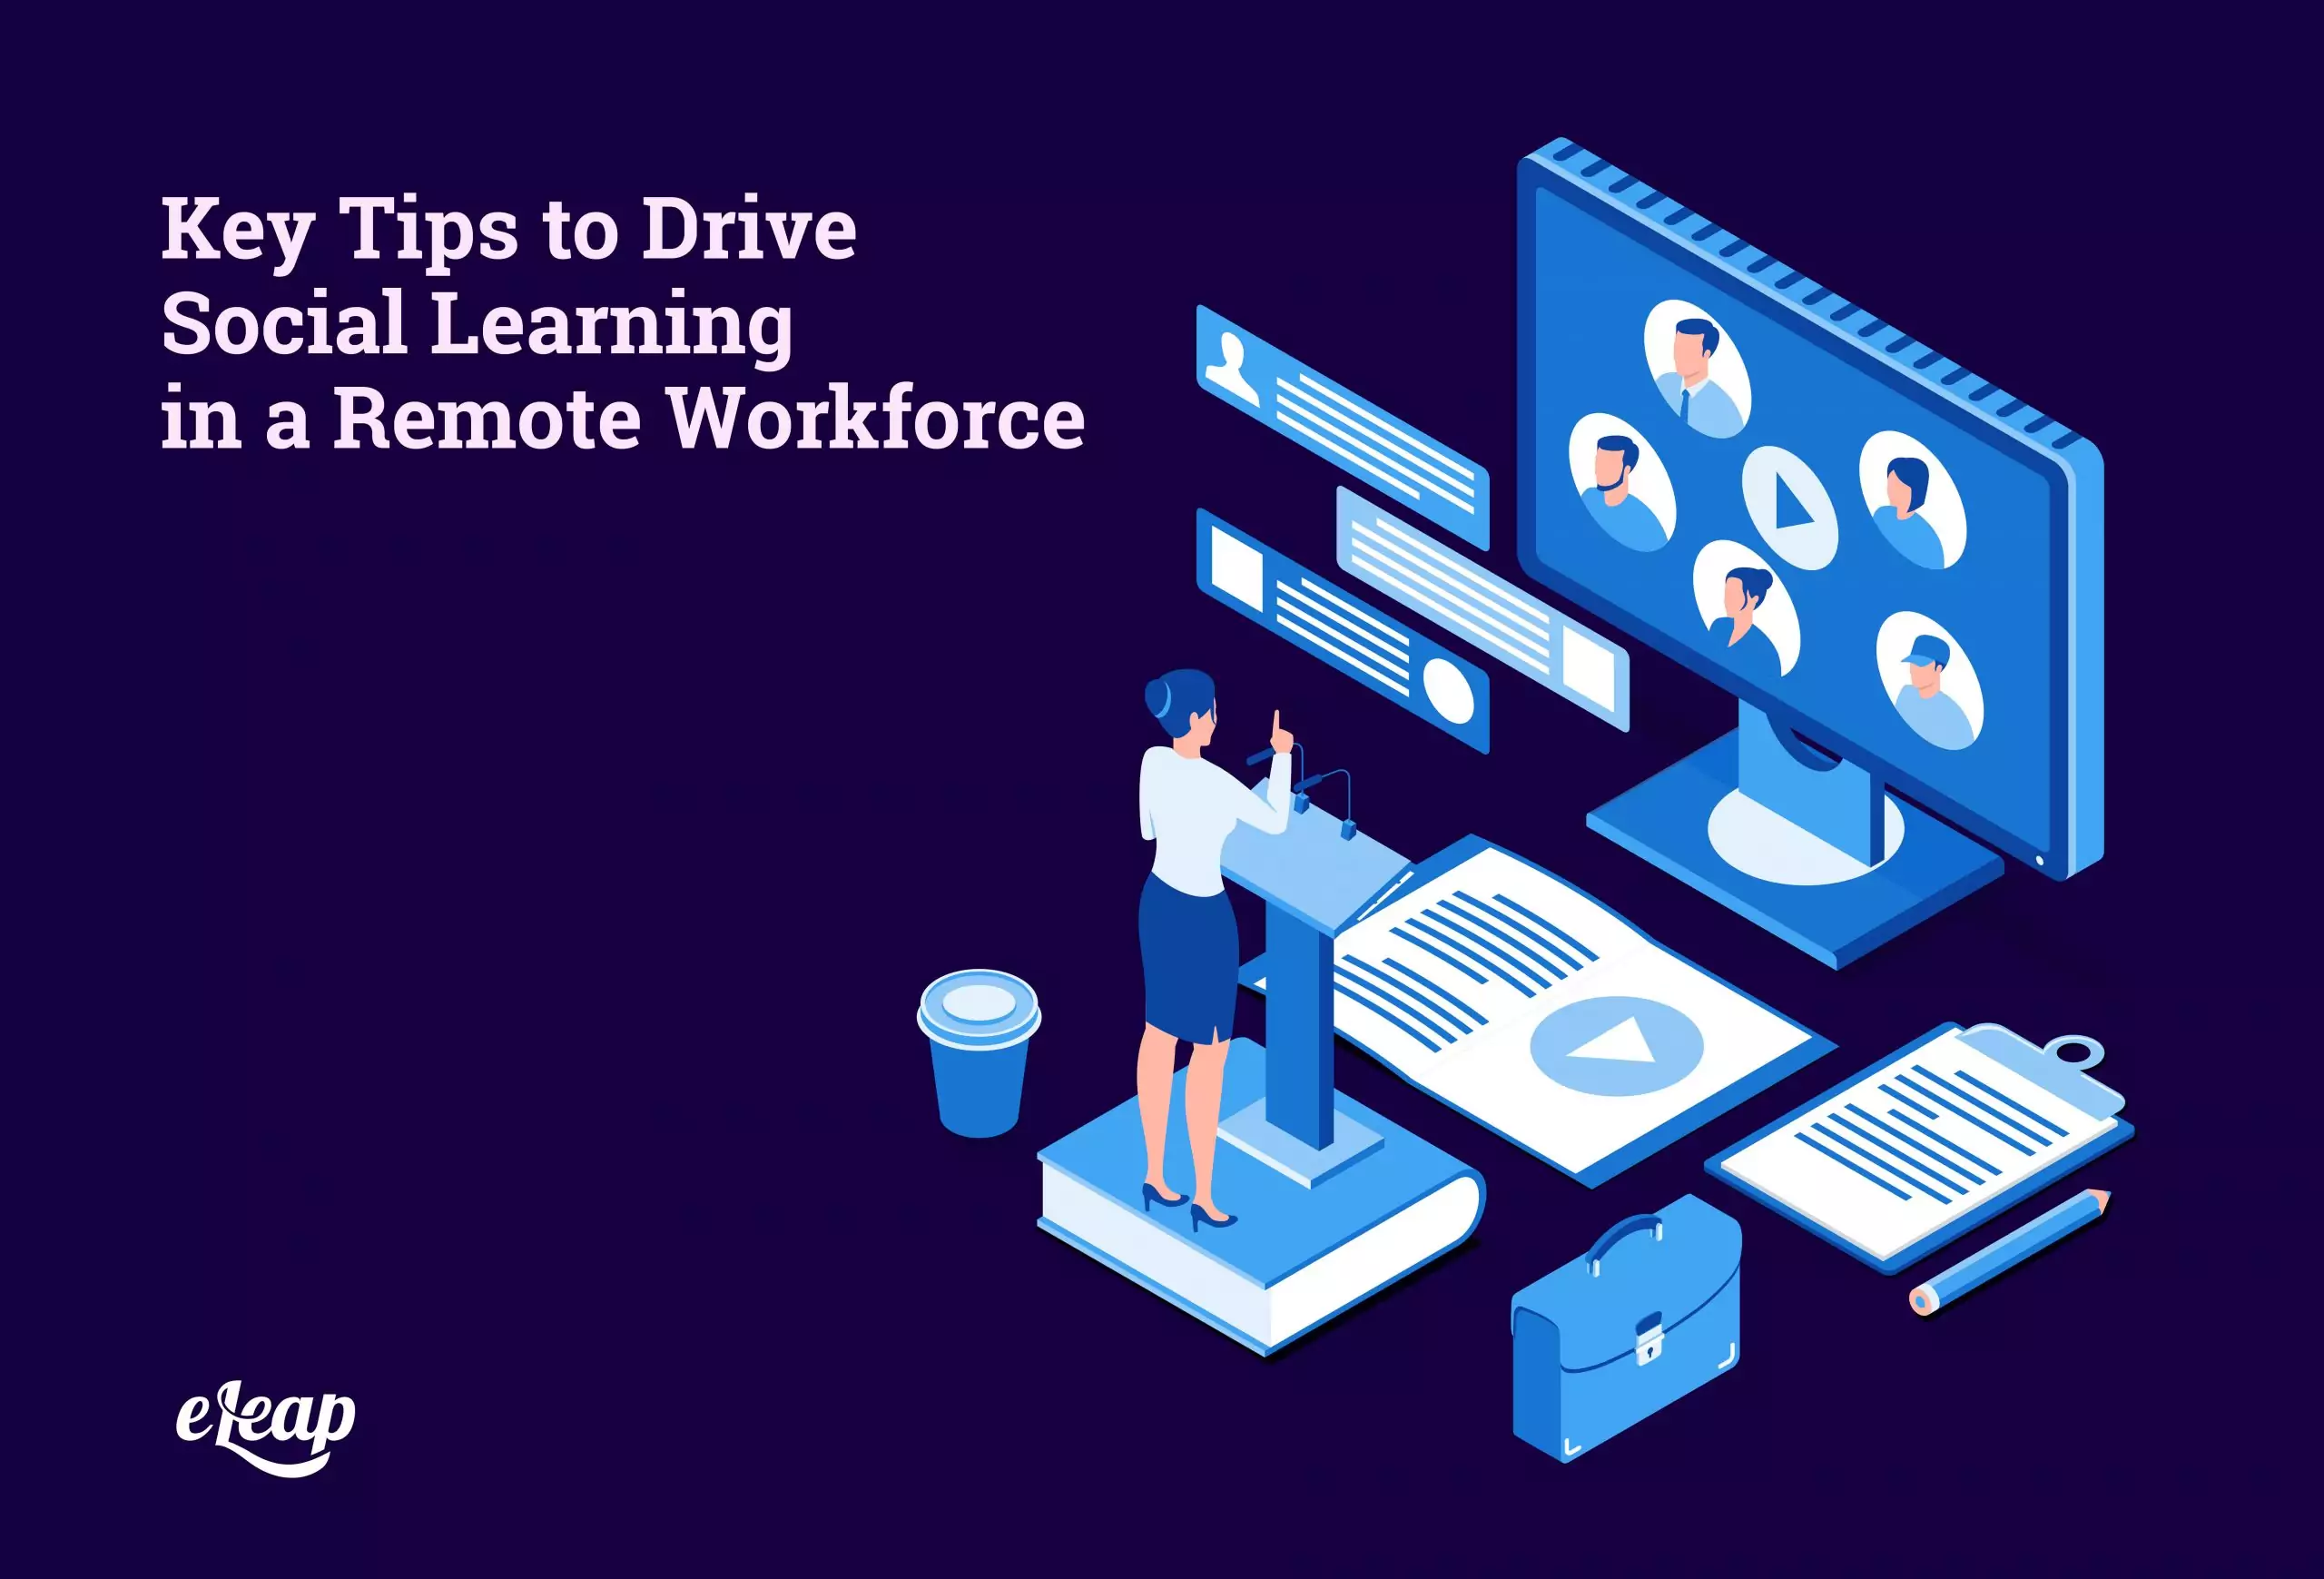 Key Tips to Drive Social Learning in a Remote Workforce